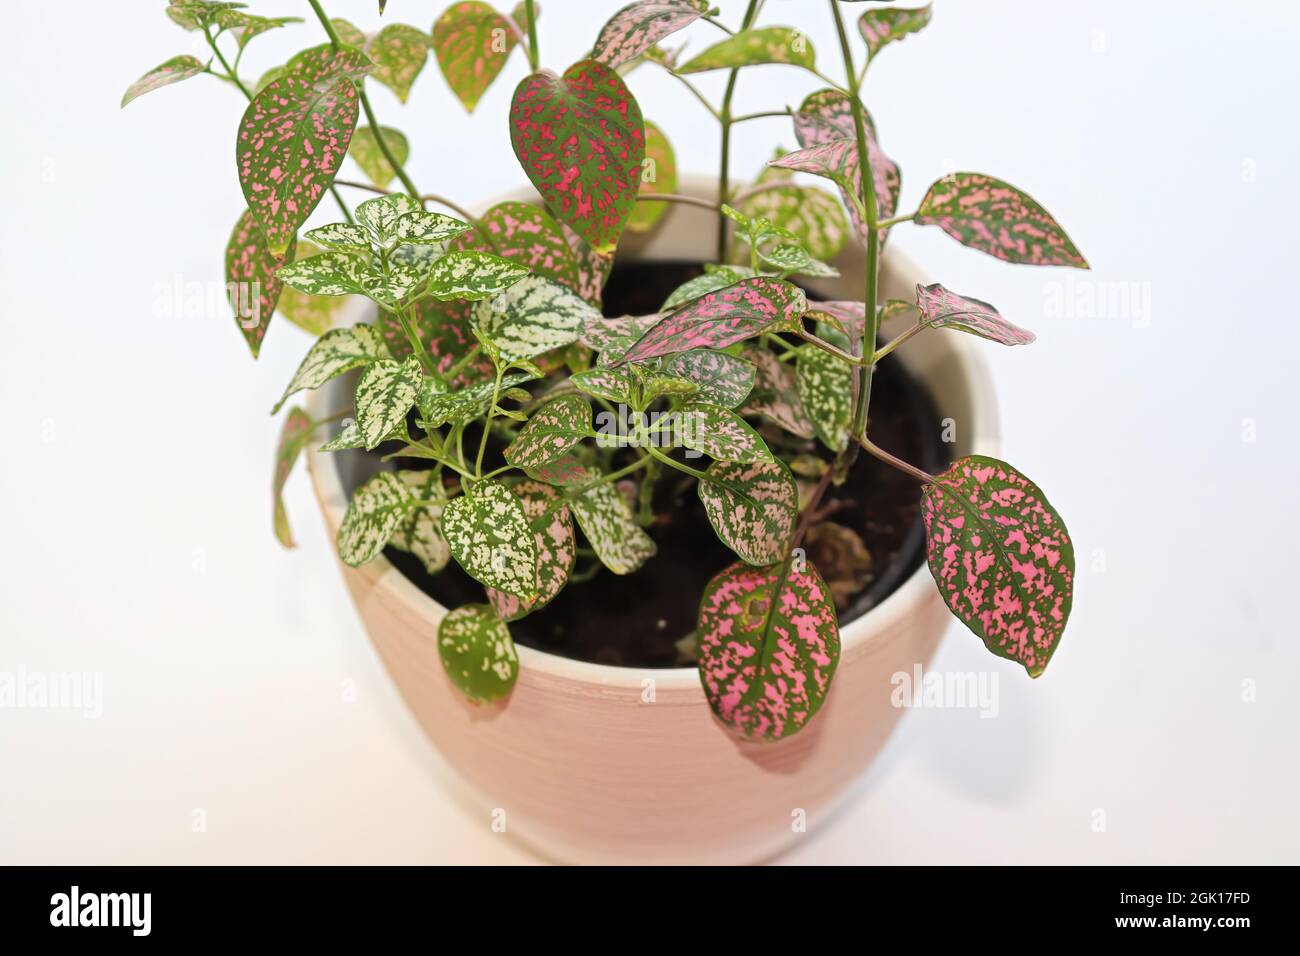 A multicolored polka dot plant in a white pot on a table Stock Photo